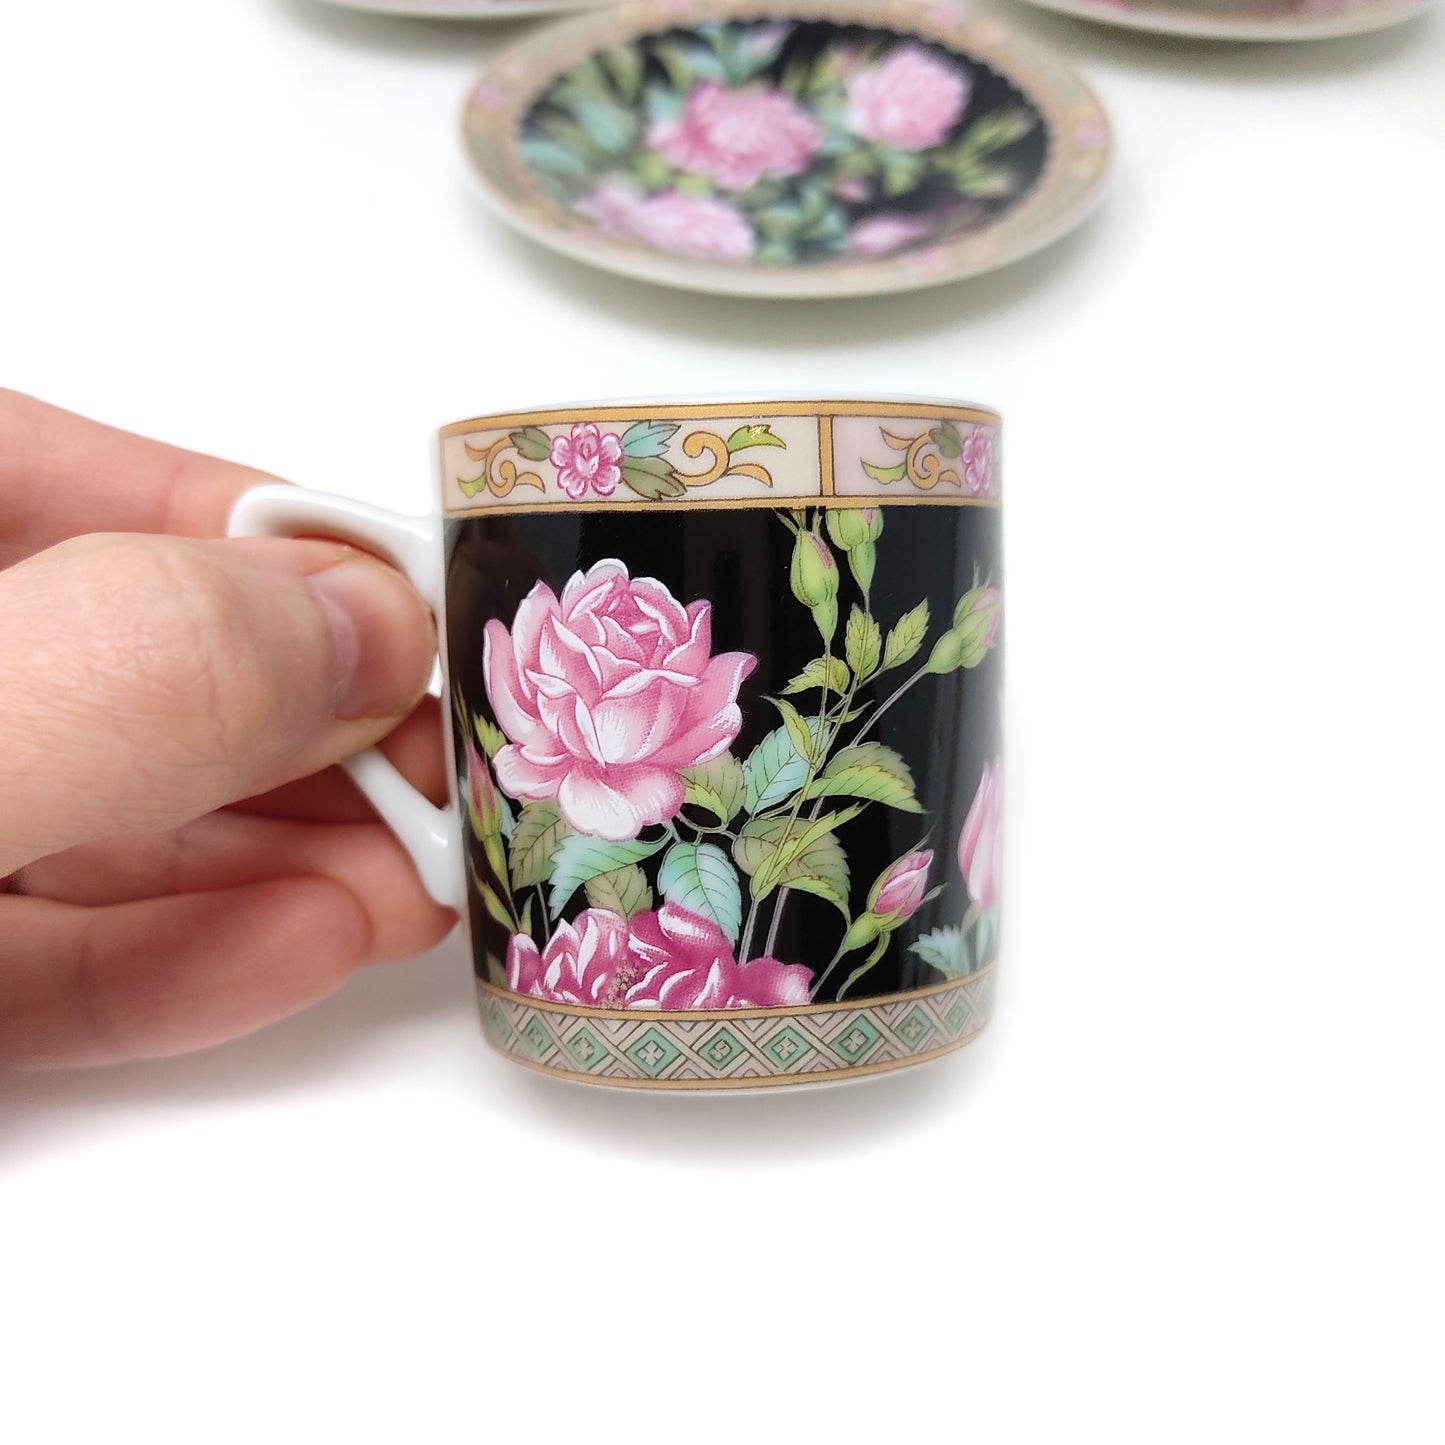 Lefton China Demitasse Cup and Saucer Set of 3 Exclusives Japan Black with Peony